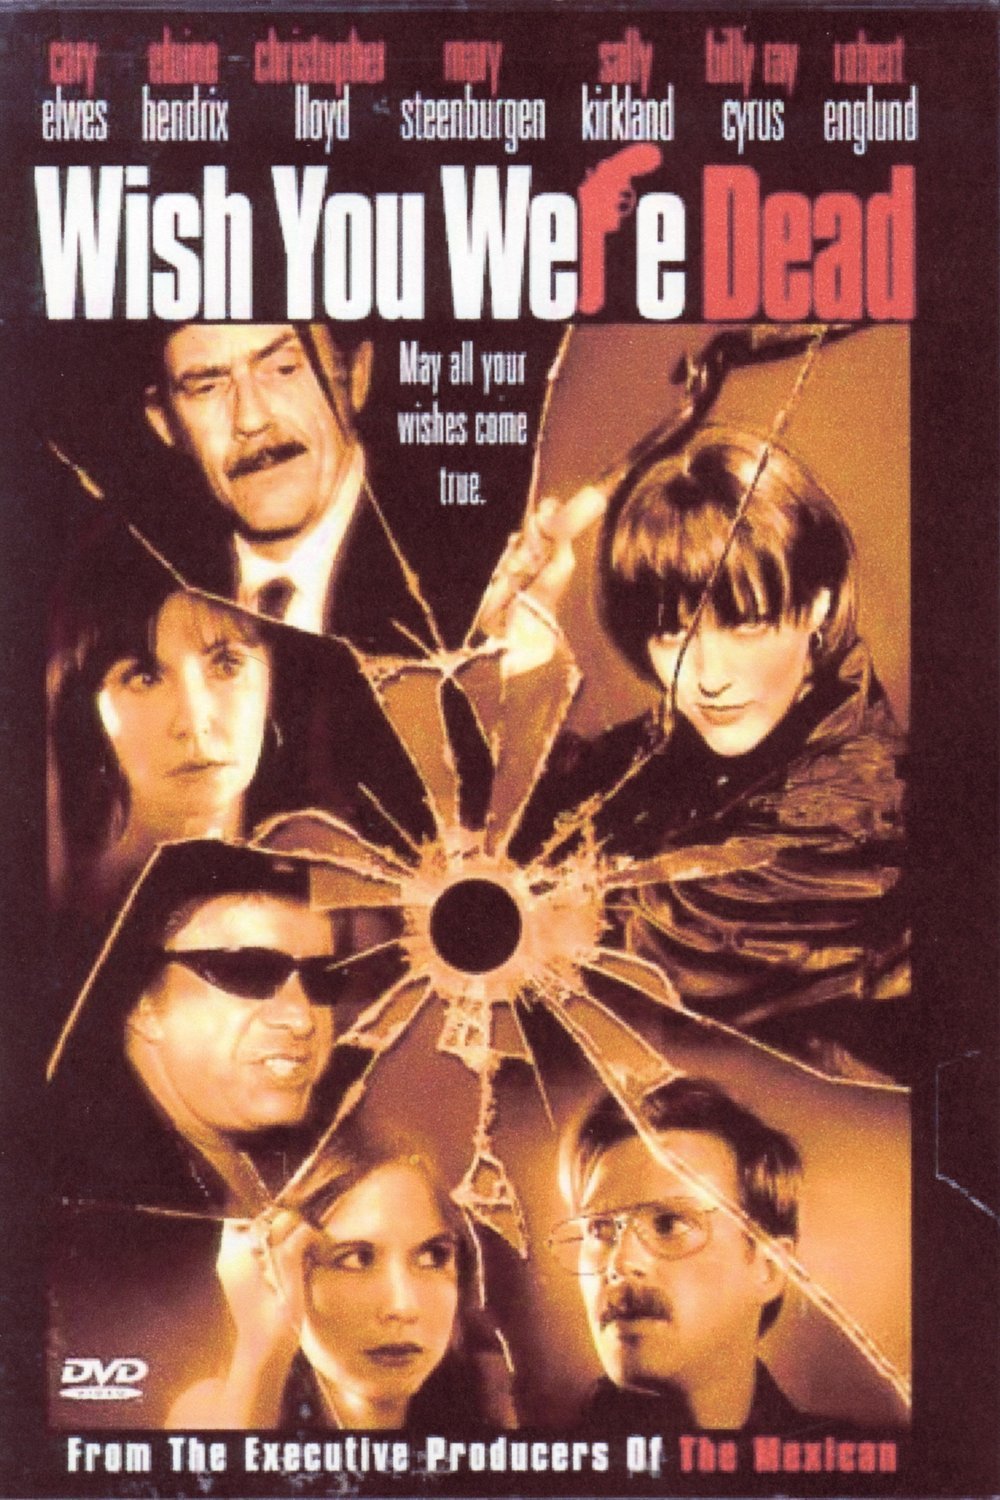 Poster of the movie Wish You Were Dead